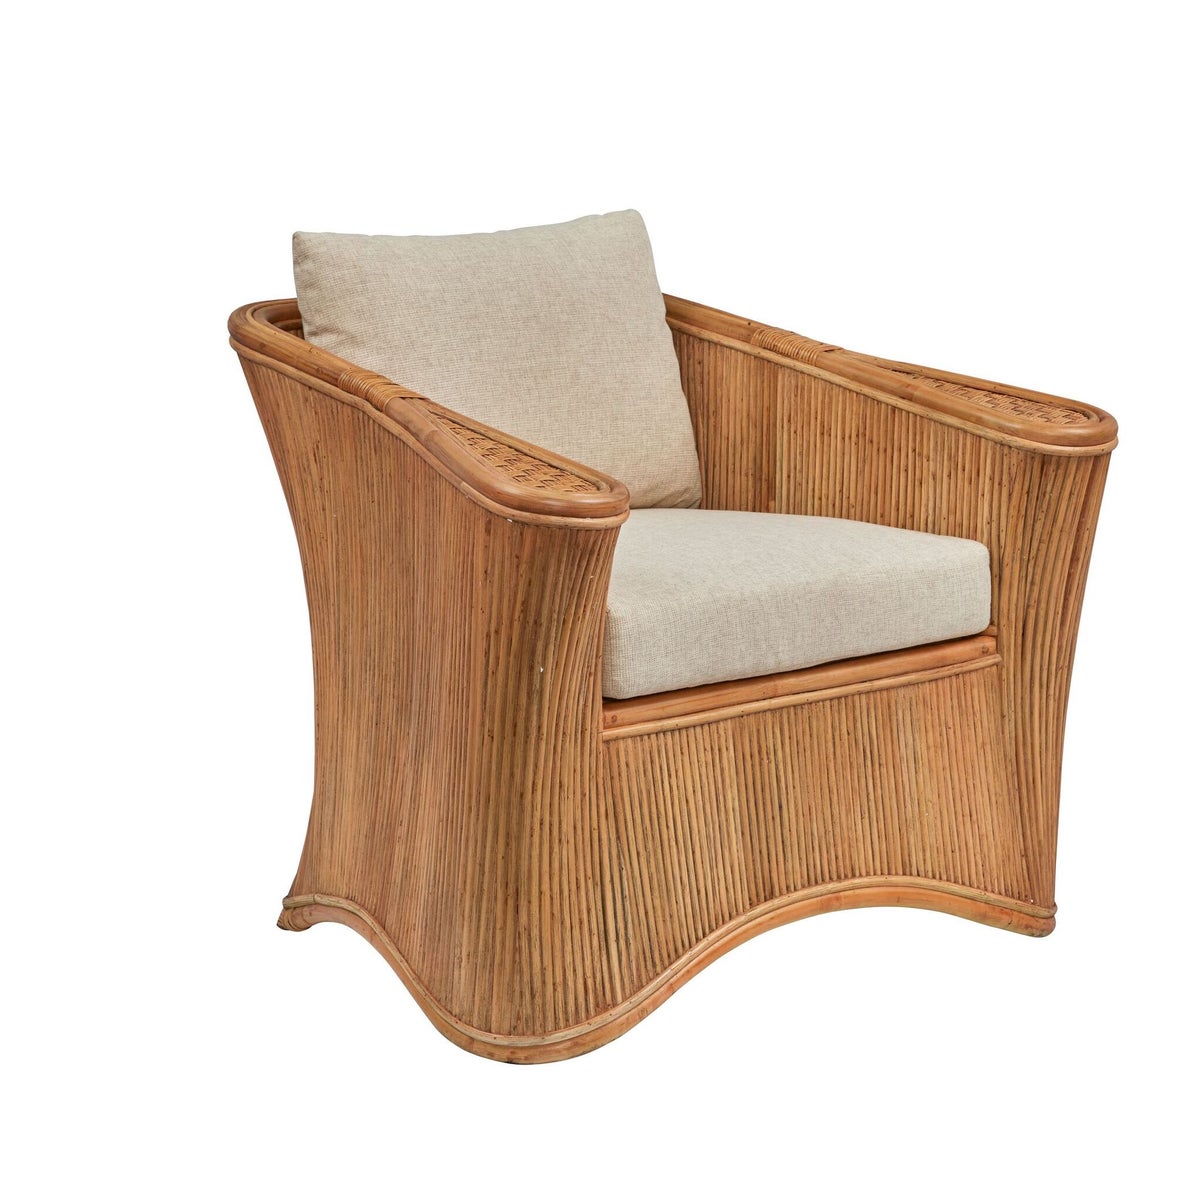 CLOSE-OUT!!Admirals Club Chair Frame Color - Buff  Cushion Color - Cream Jarrett Bay Collection